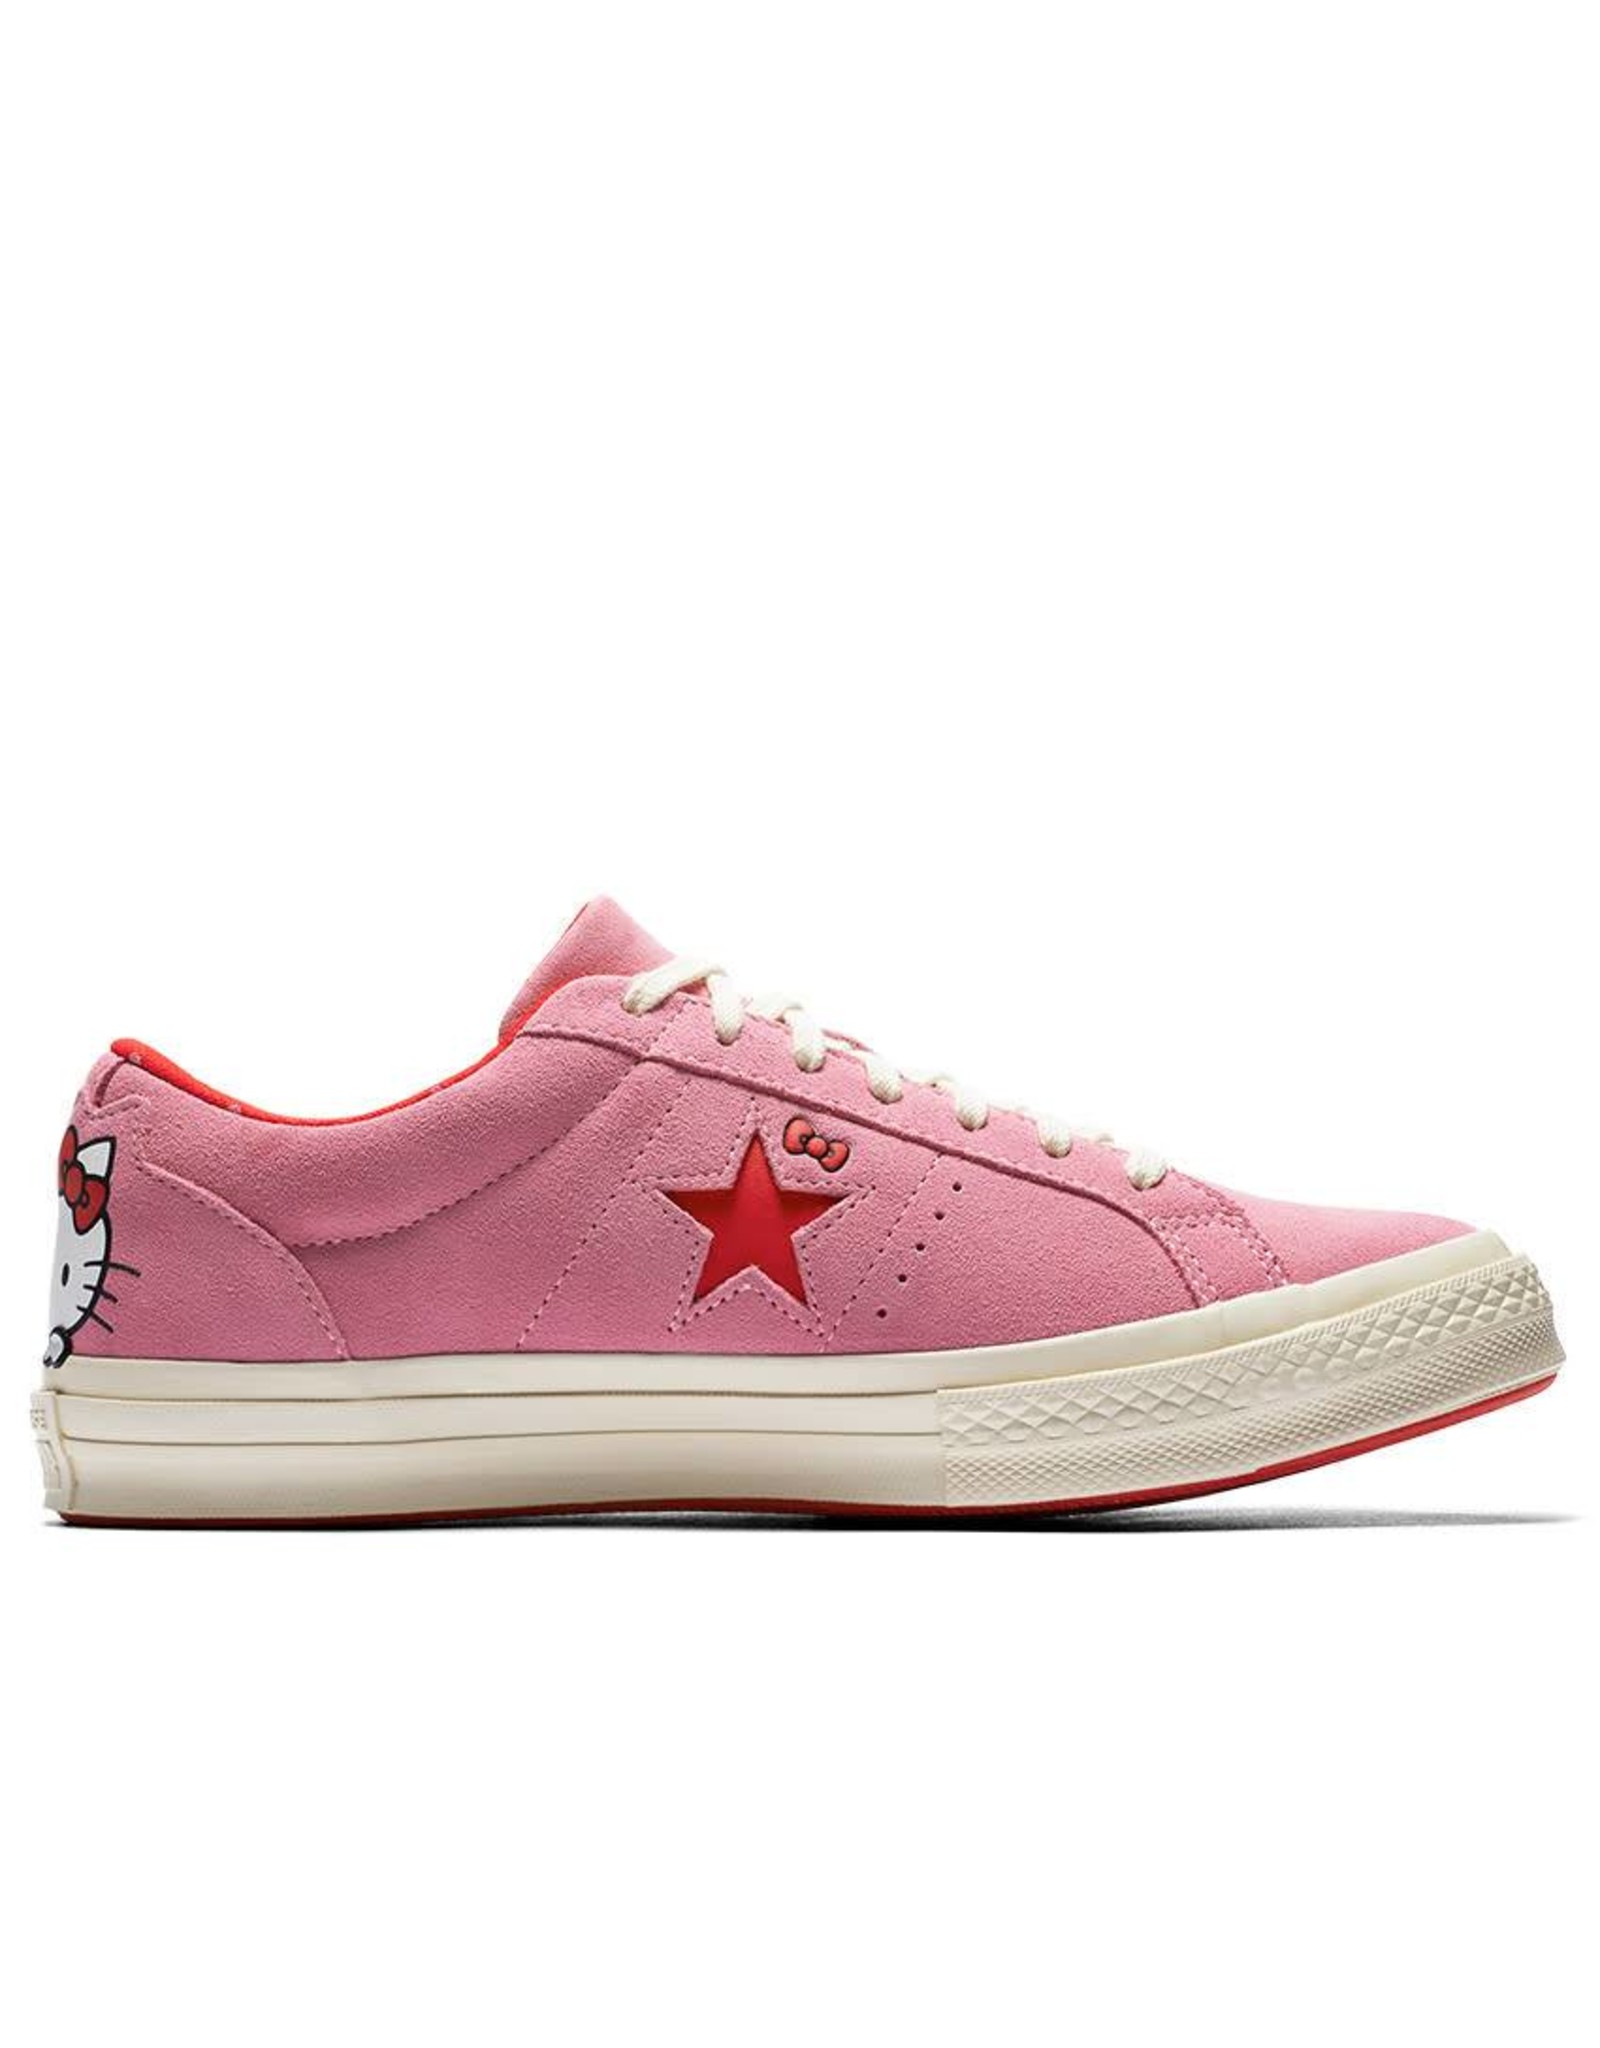 converse one star red pink